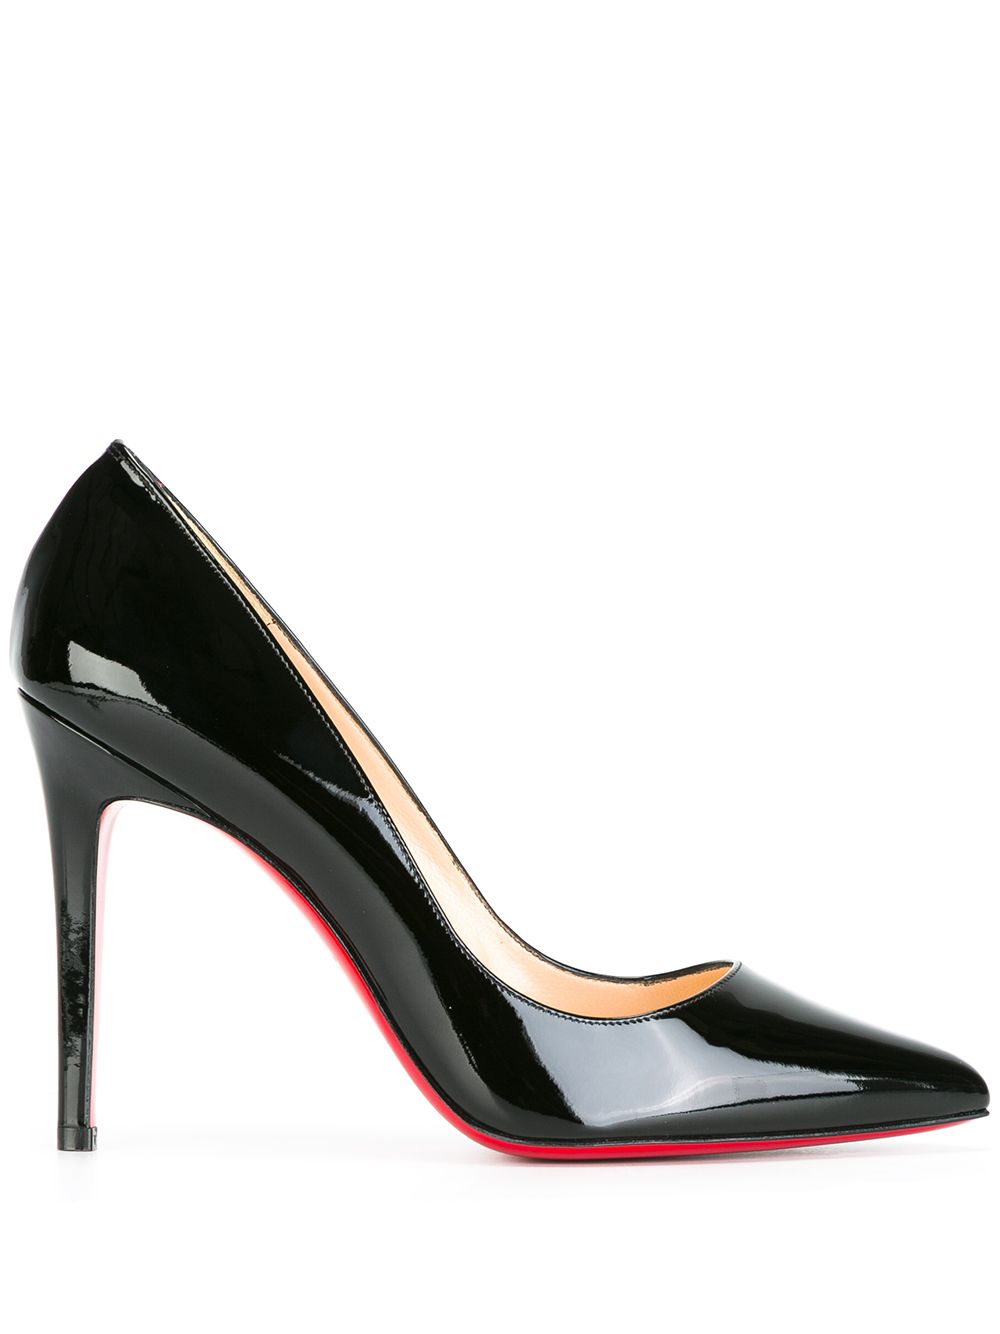 CHRISTIAN LOUBOUTIN Black Leather Classic Pumps for Women